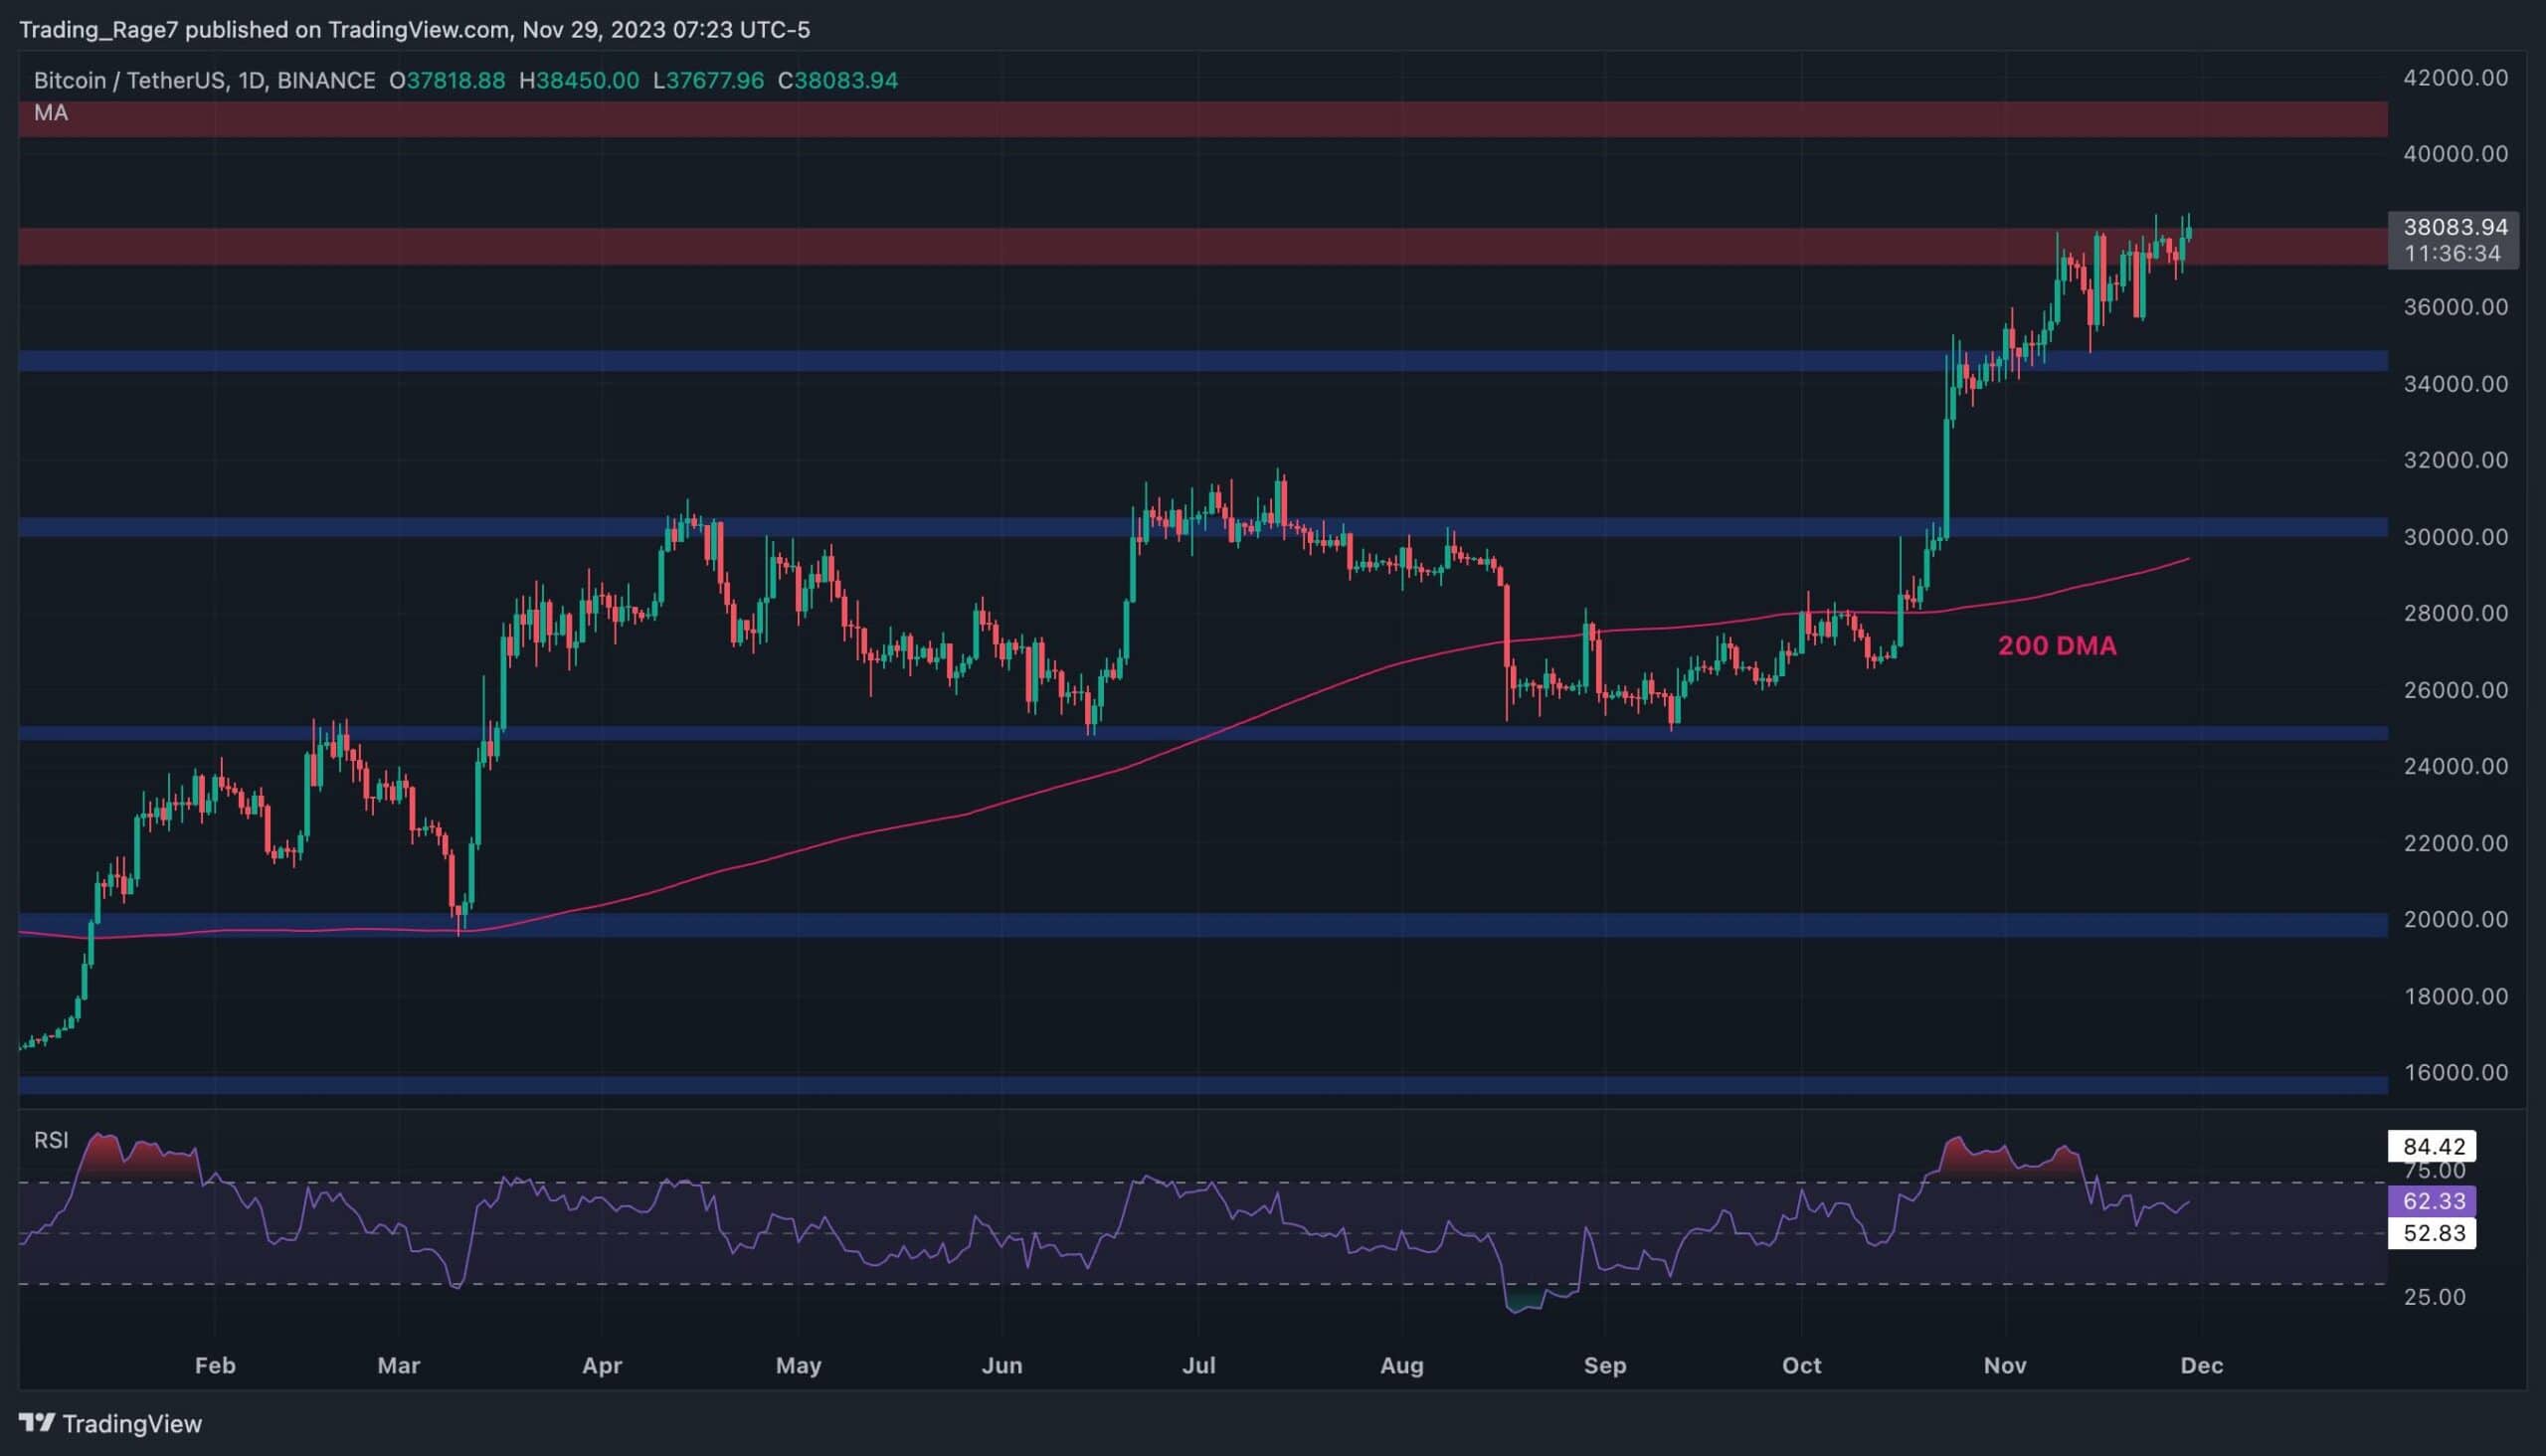 BTC Puts $38K to the Test but are Bears Staging a Serious Correction? (Bitcoin Price Analysis)